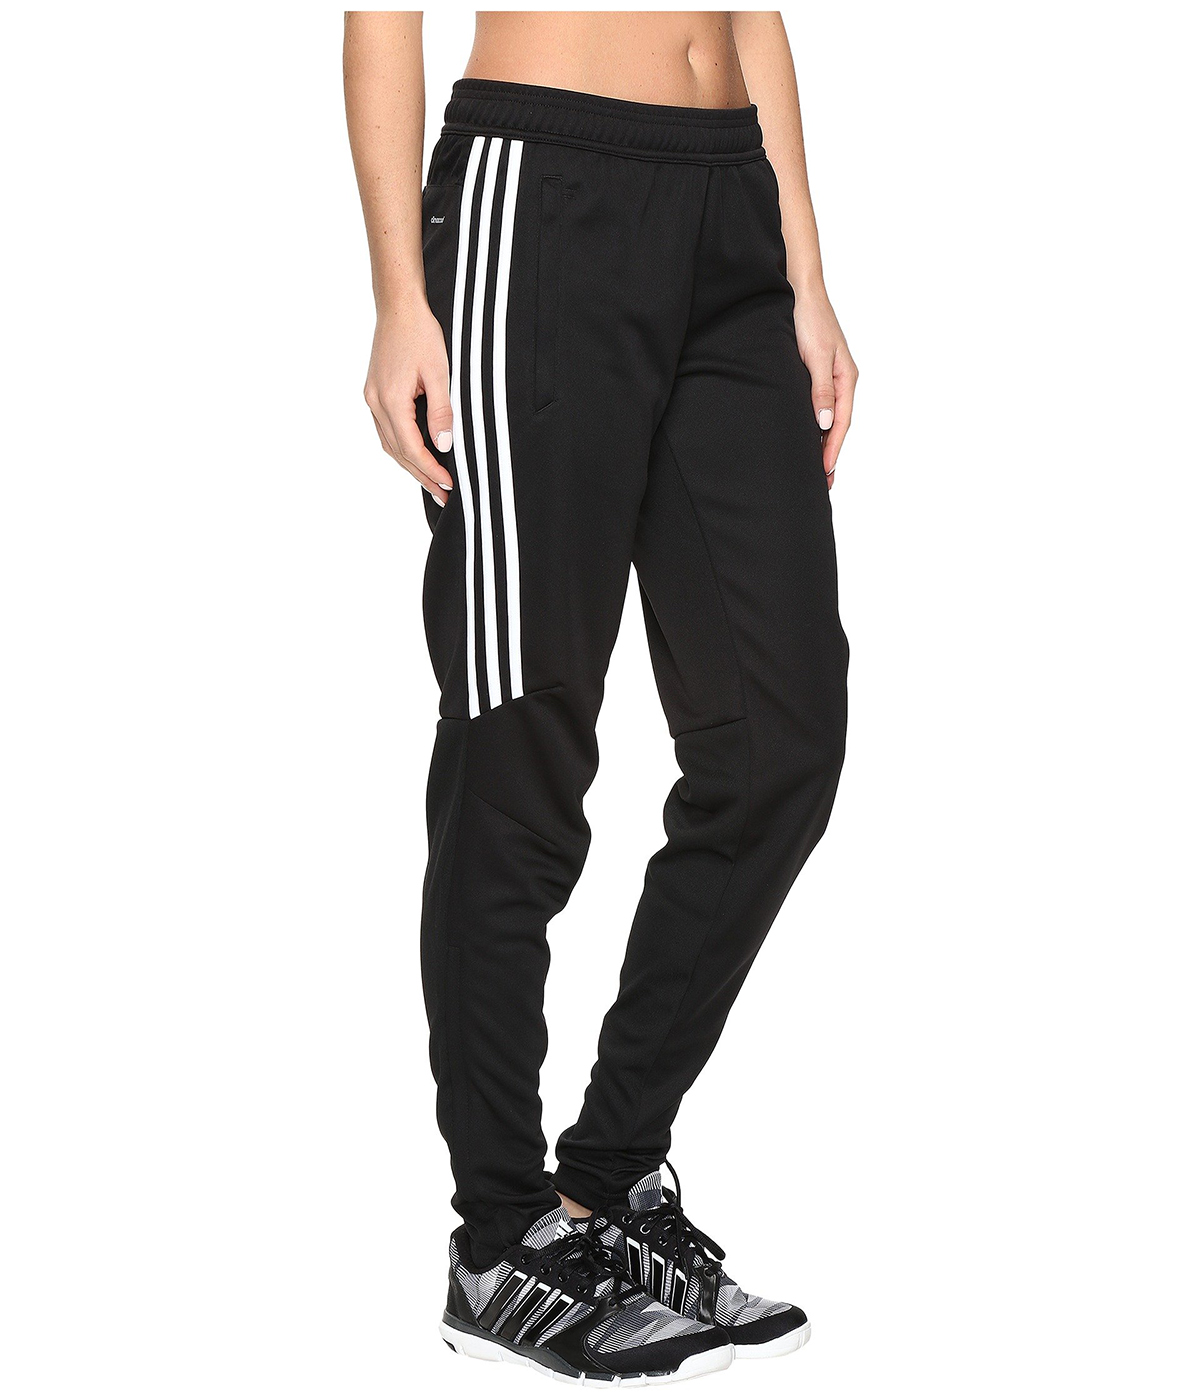 We're Wearing These Adidas Pants Both 